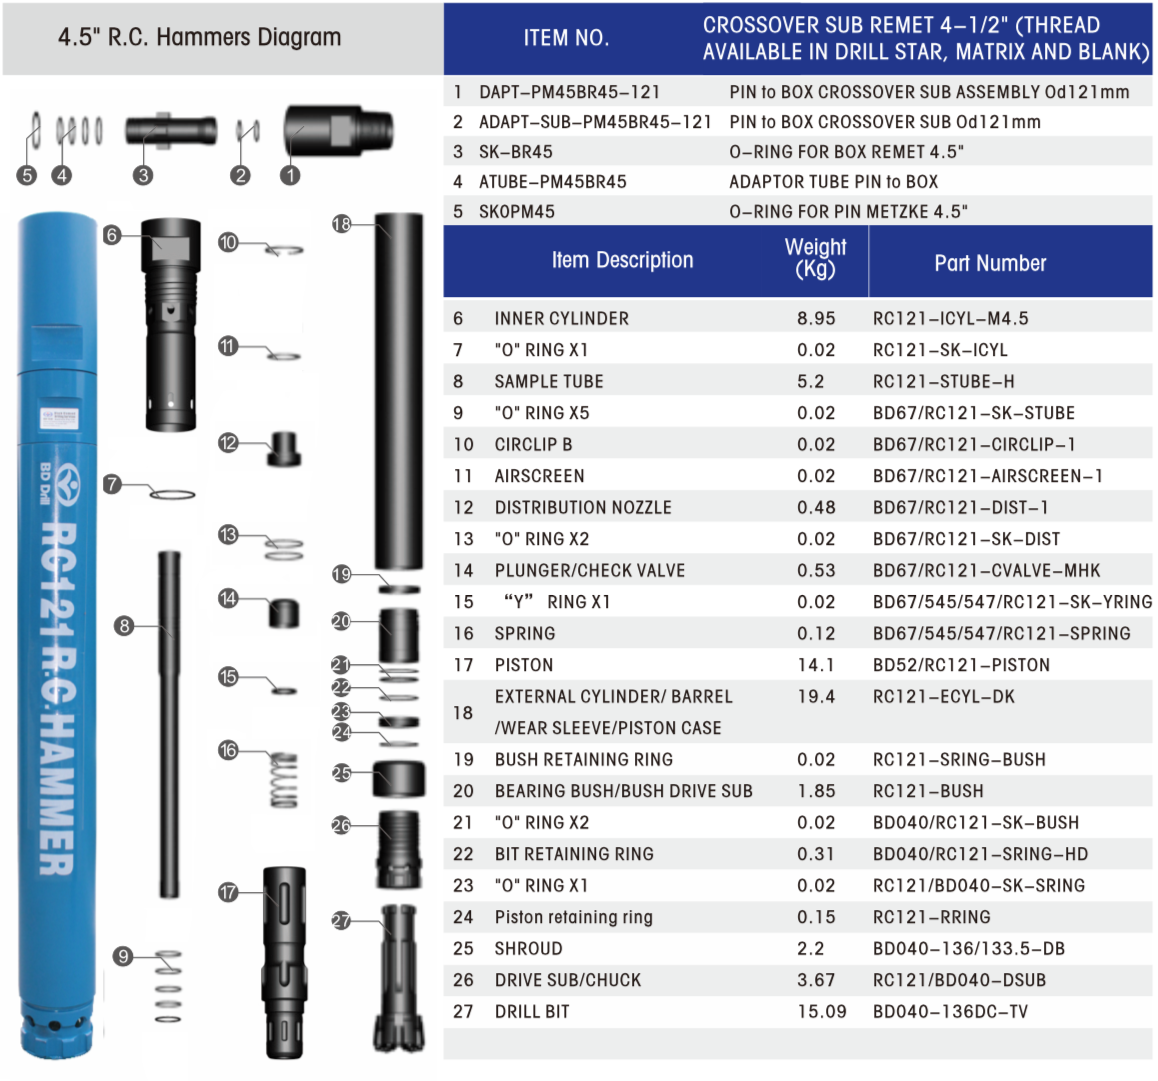 Black Diamond Drilling RC121 RC Reverse Circulation Hammer schematic and parts list